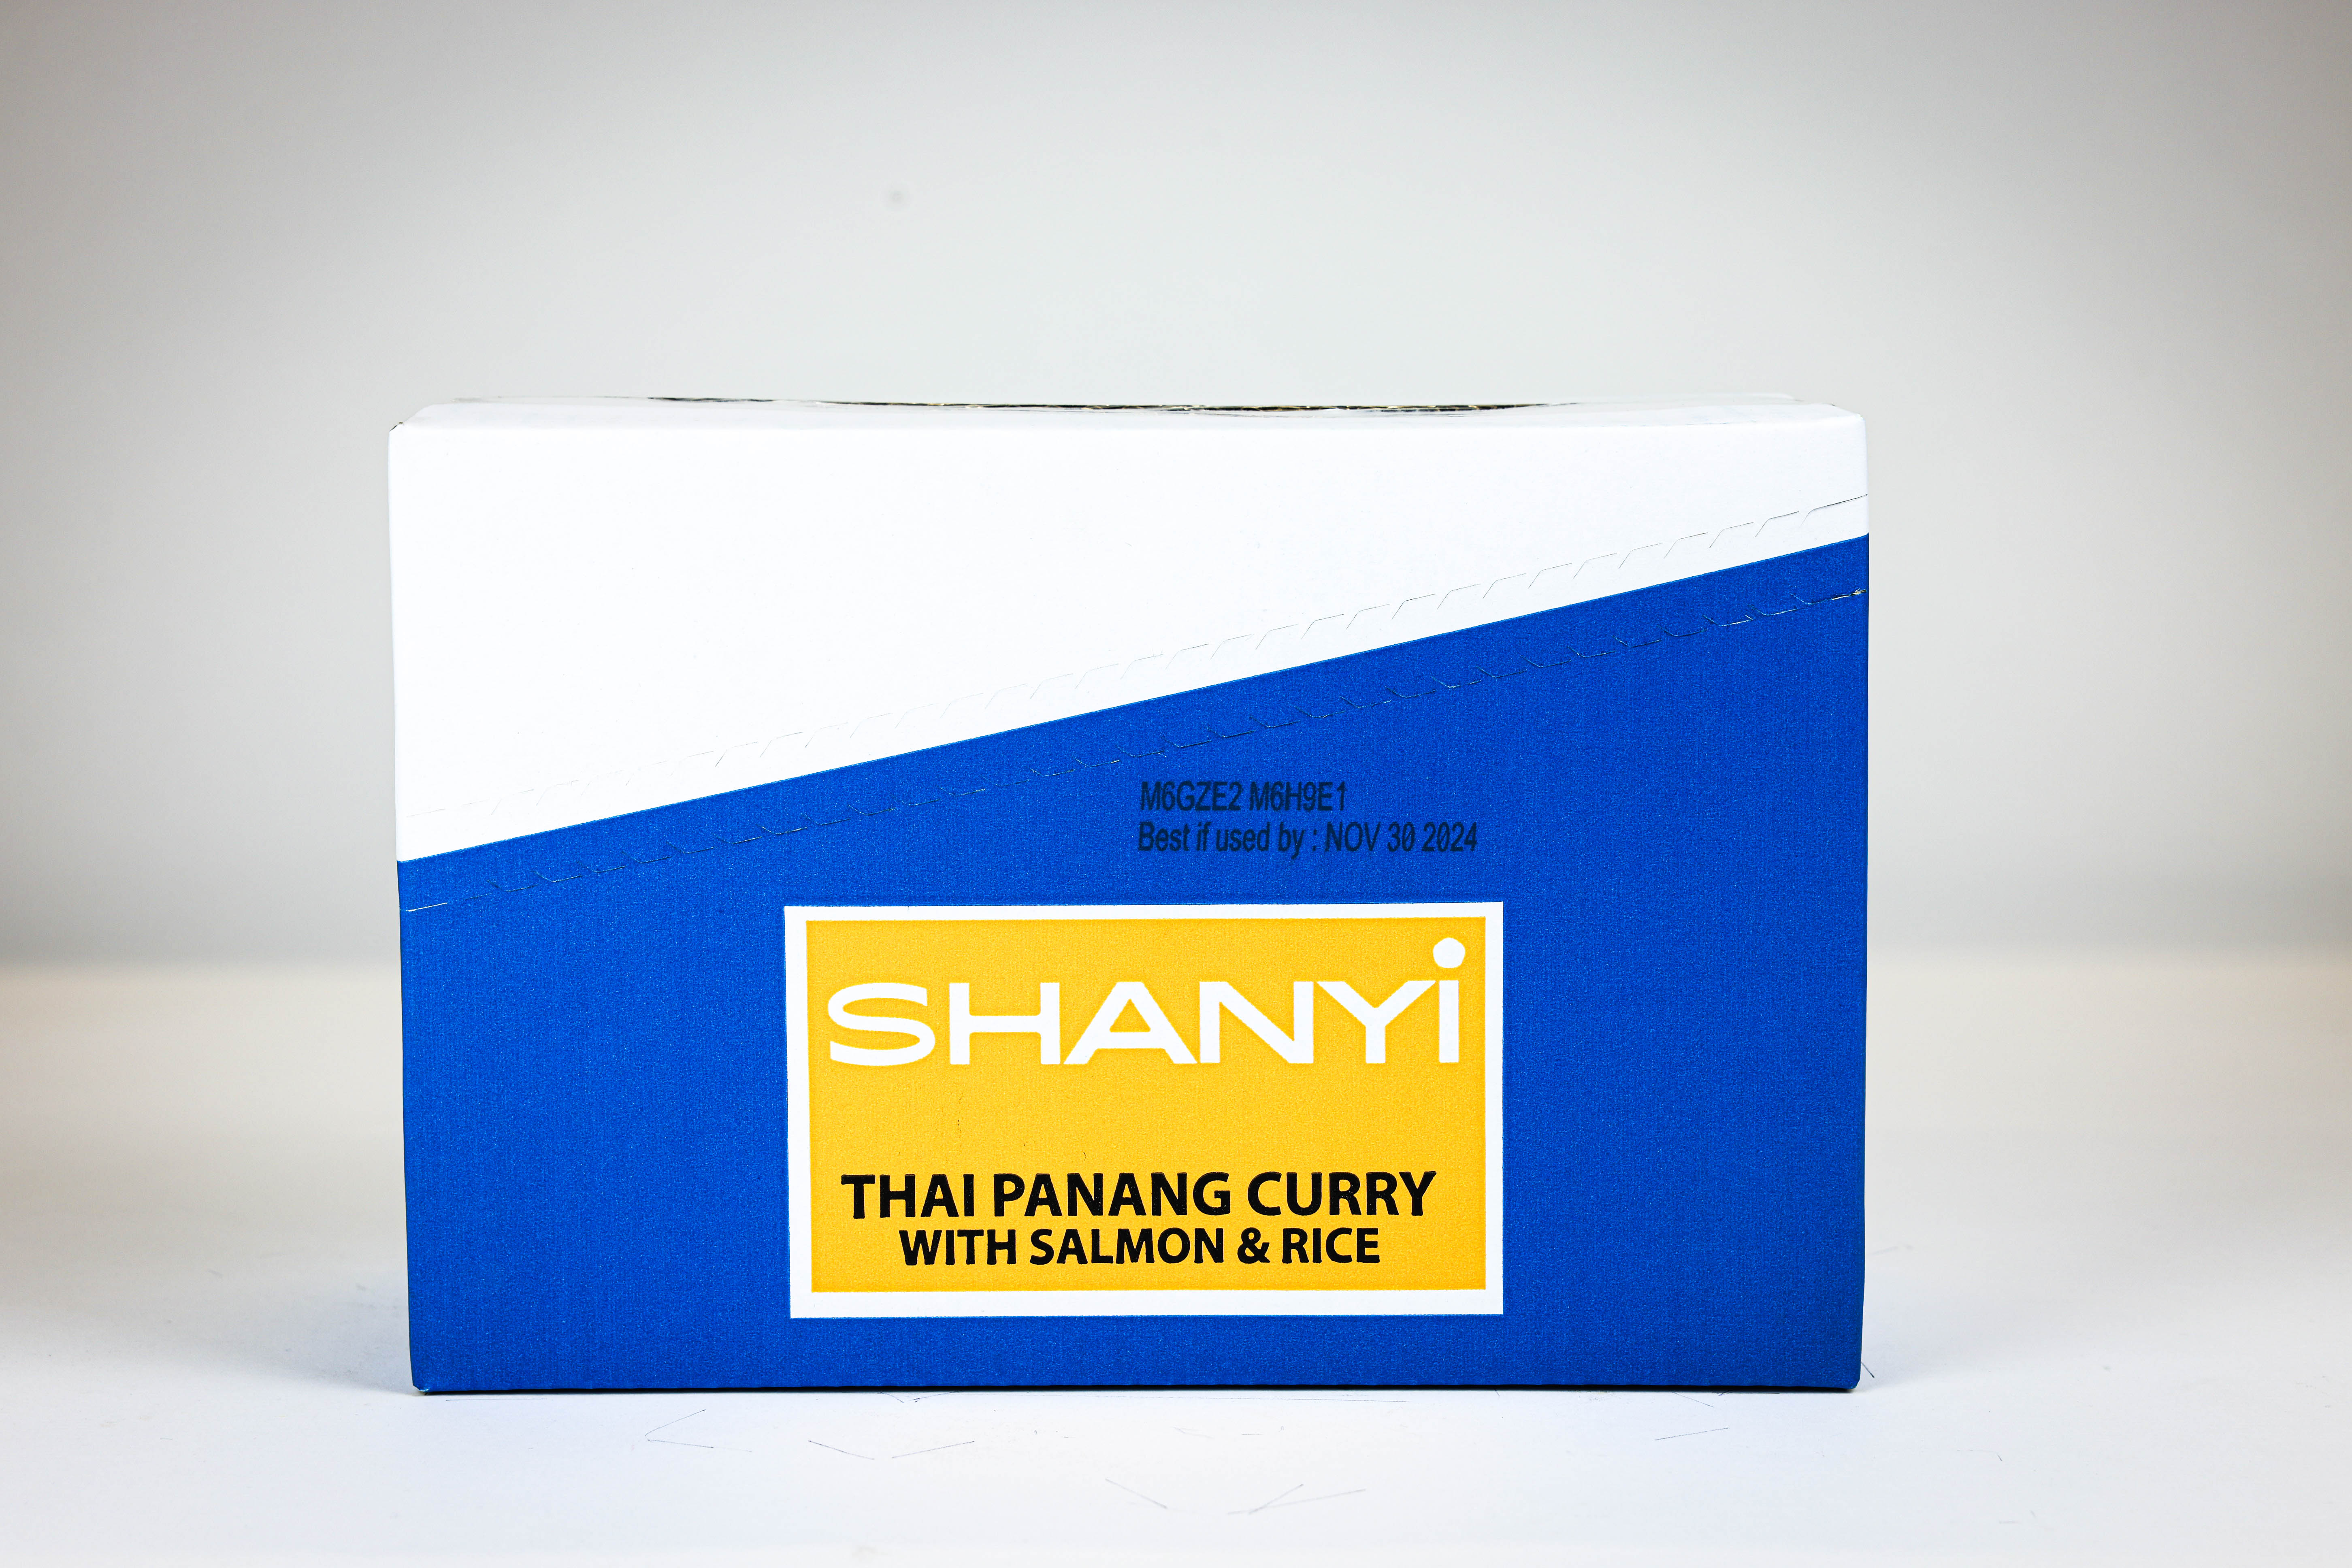 ShanYi Instant Microwave Meals Ready to Eat, 250g/8.8oz, Thai Panang Curry with Salmon and Jasmine Rice, Case of 6